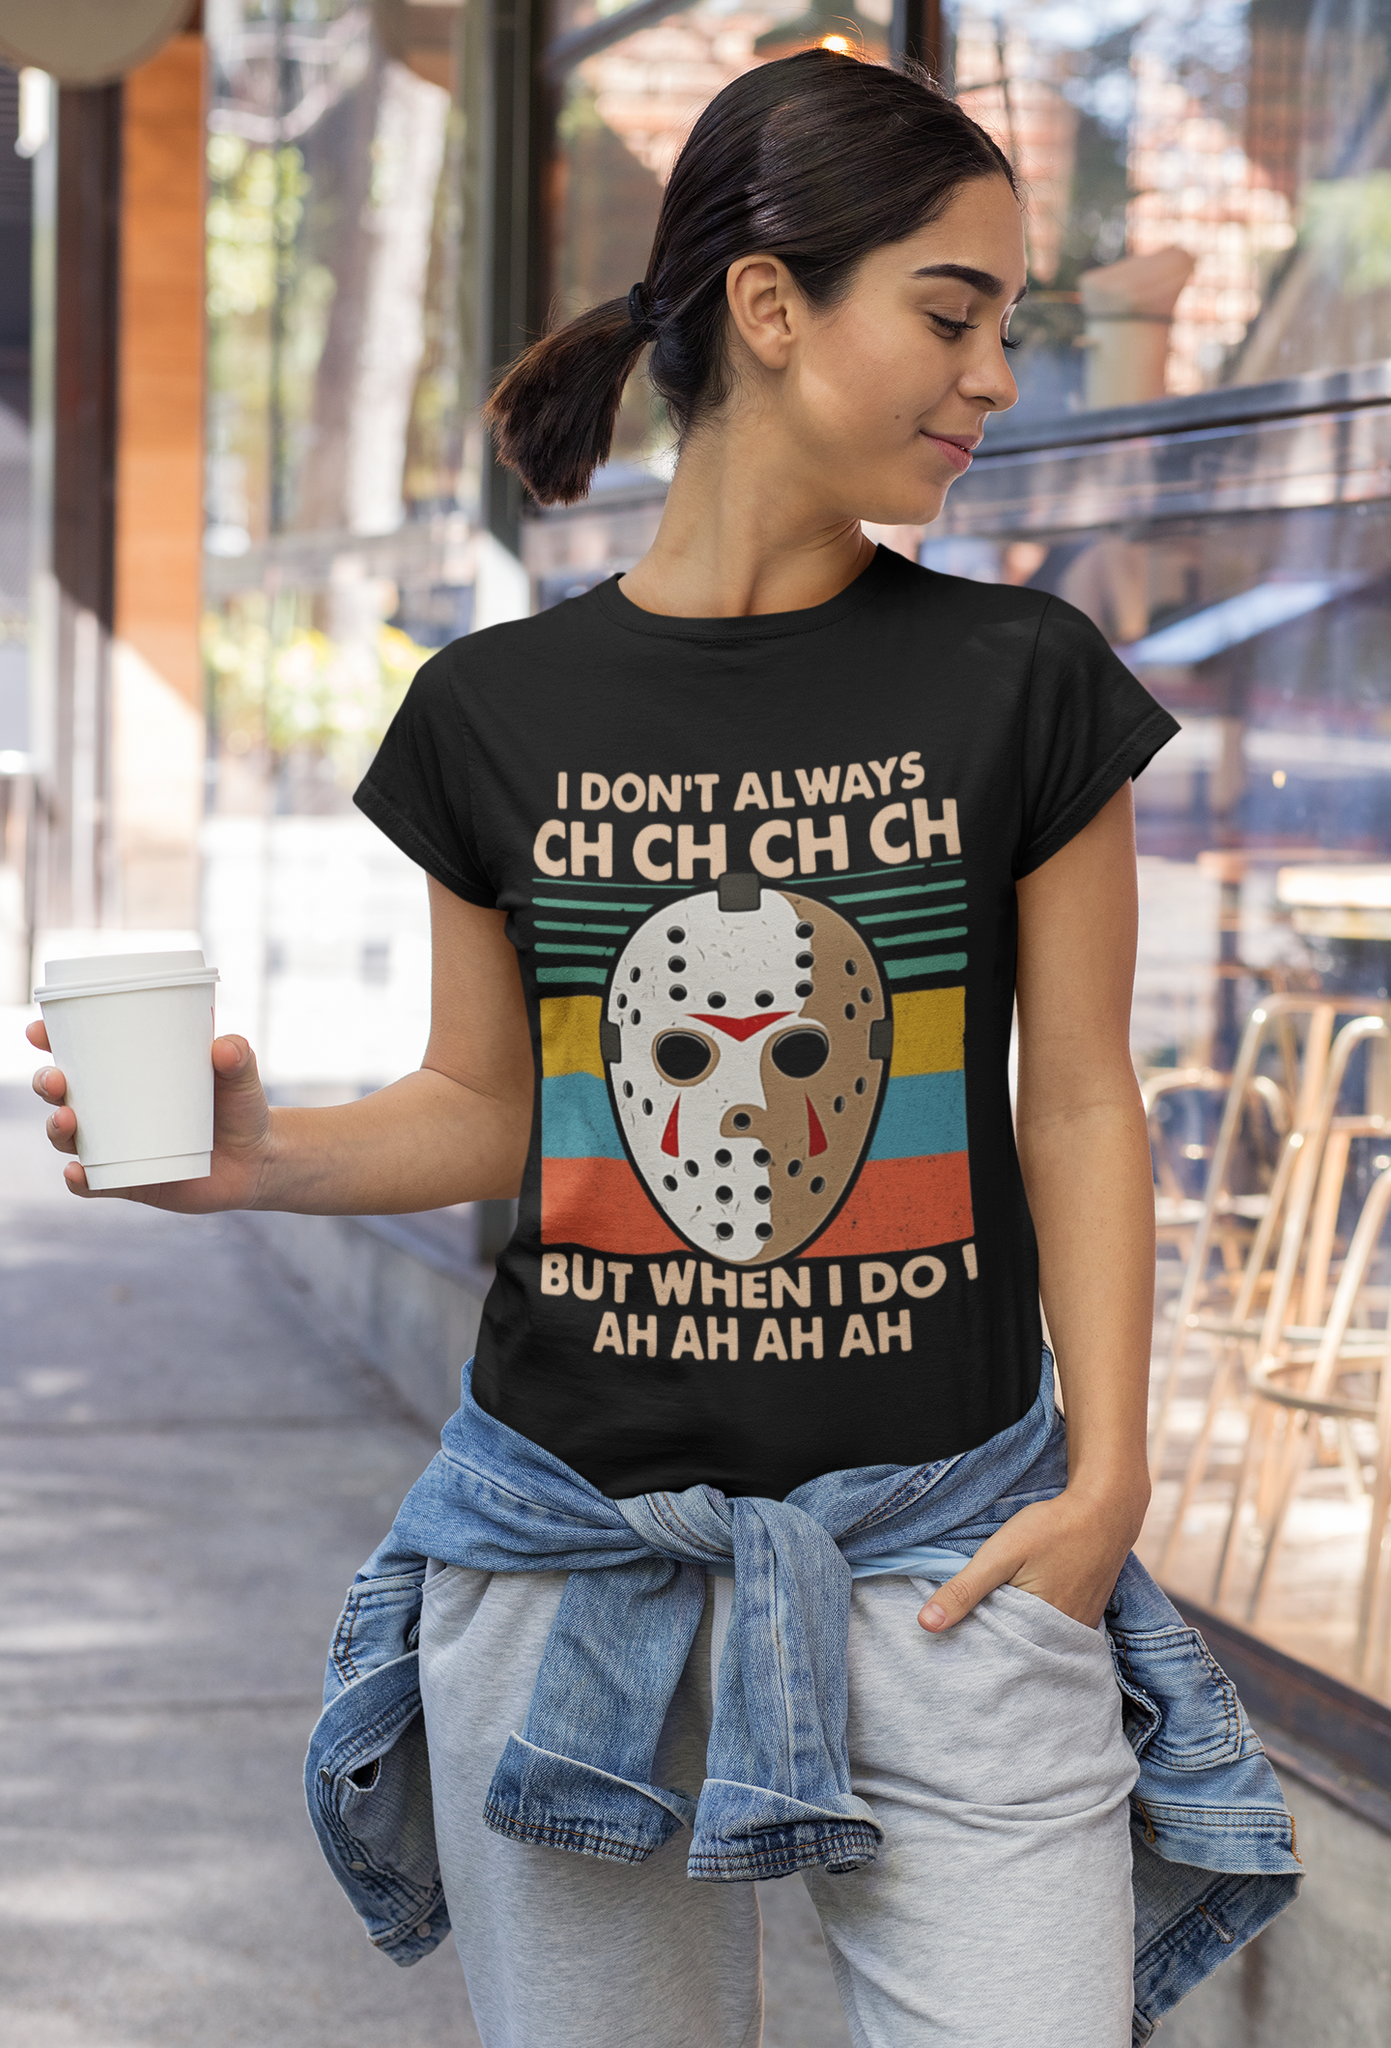 Friday 13th Vintage T Shirt, I Dont Always Ch Ch Ch Tshirt, Jason Voorhees Mask T Shirt, Halloween Gifts